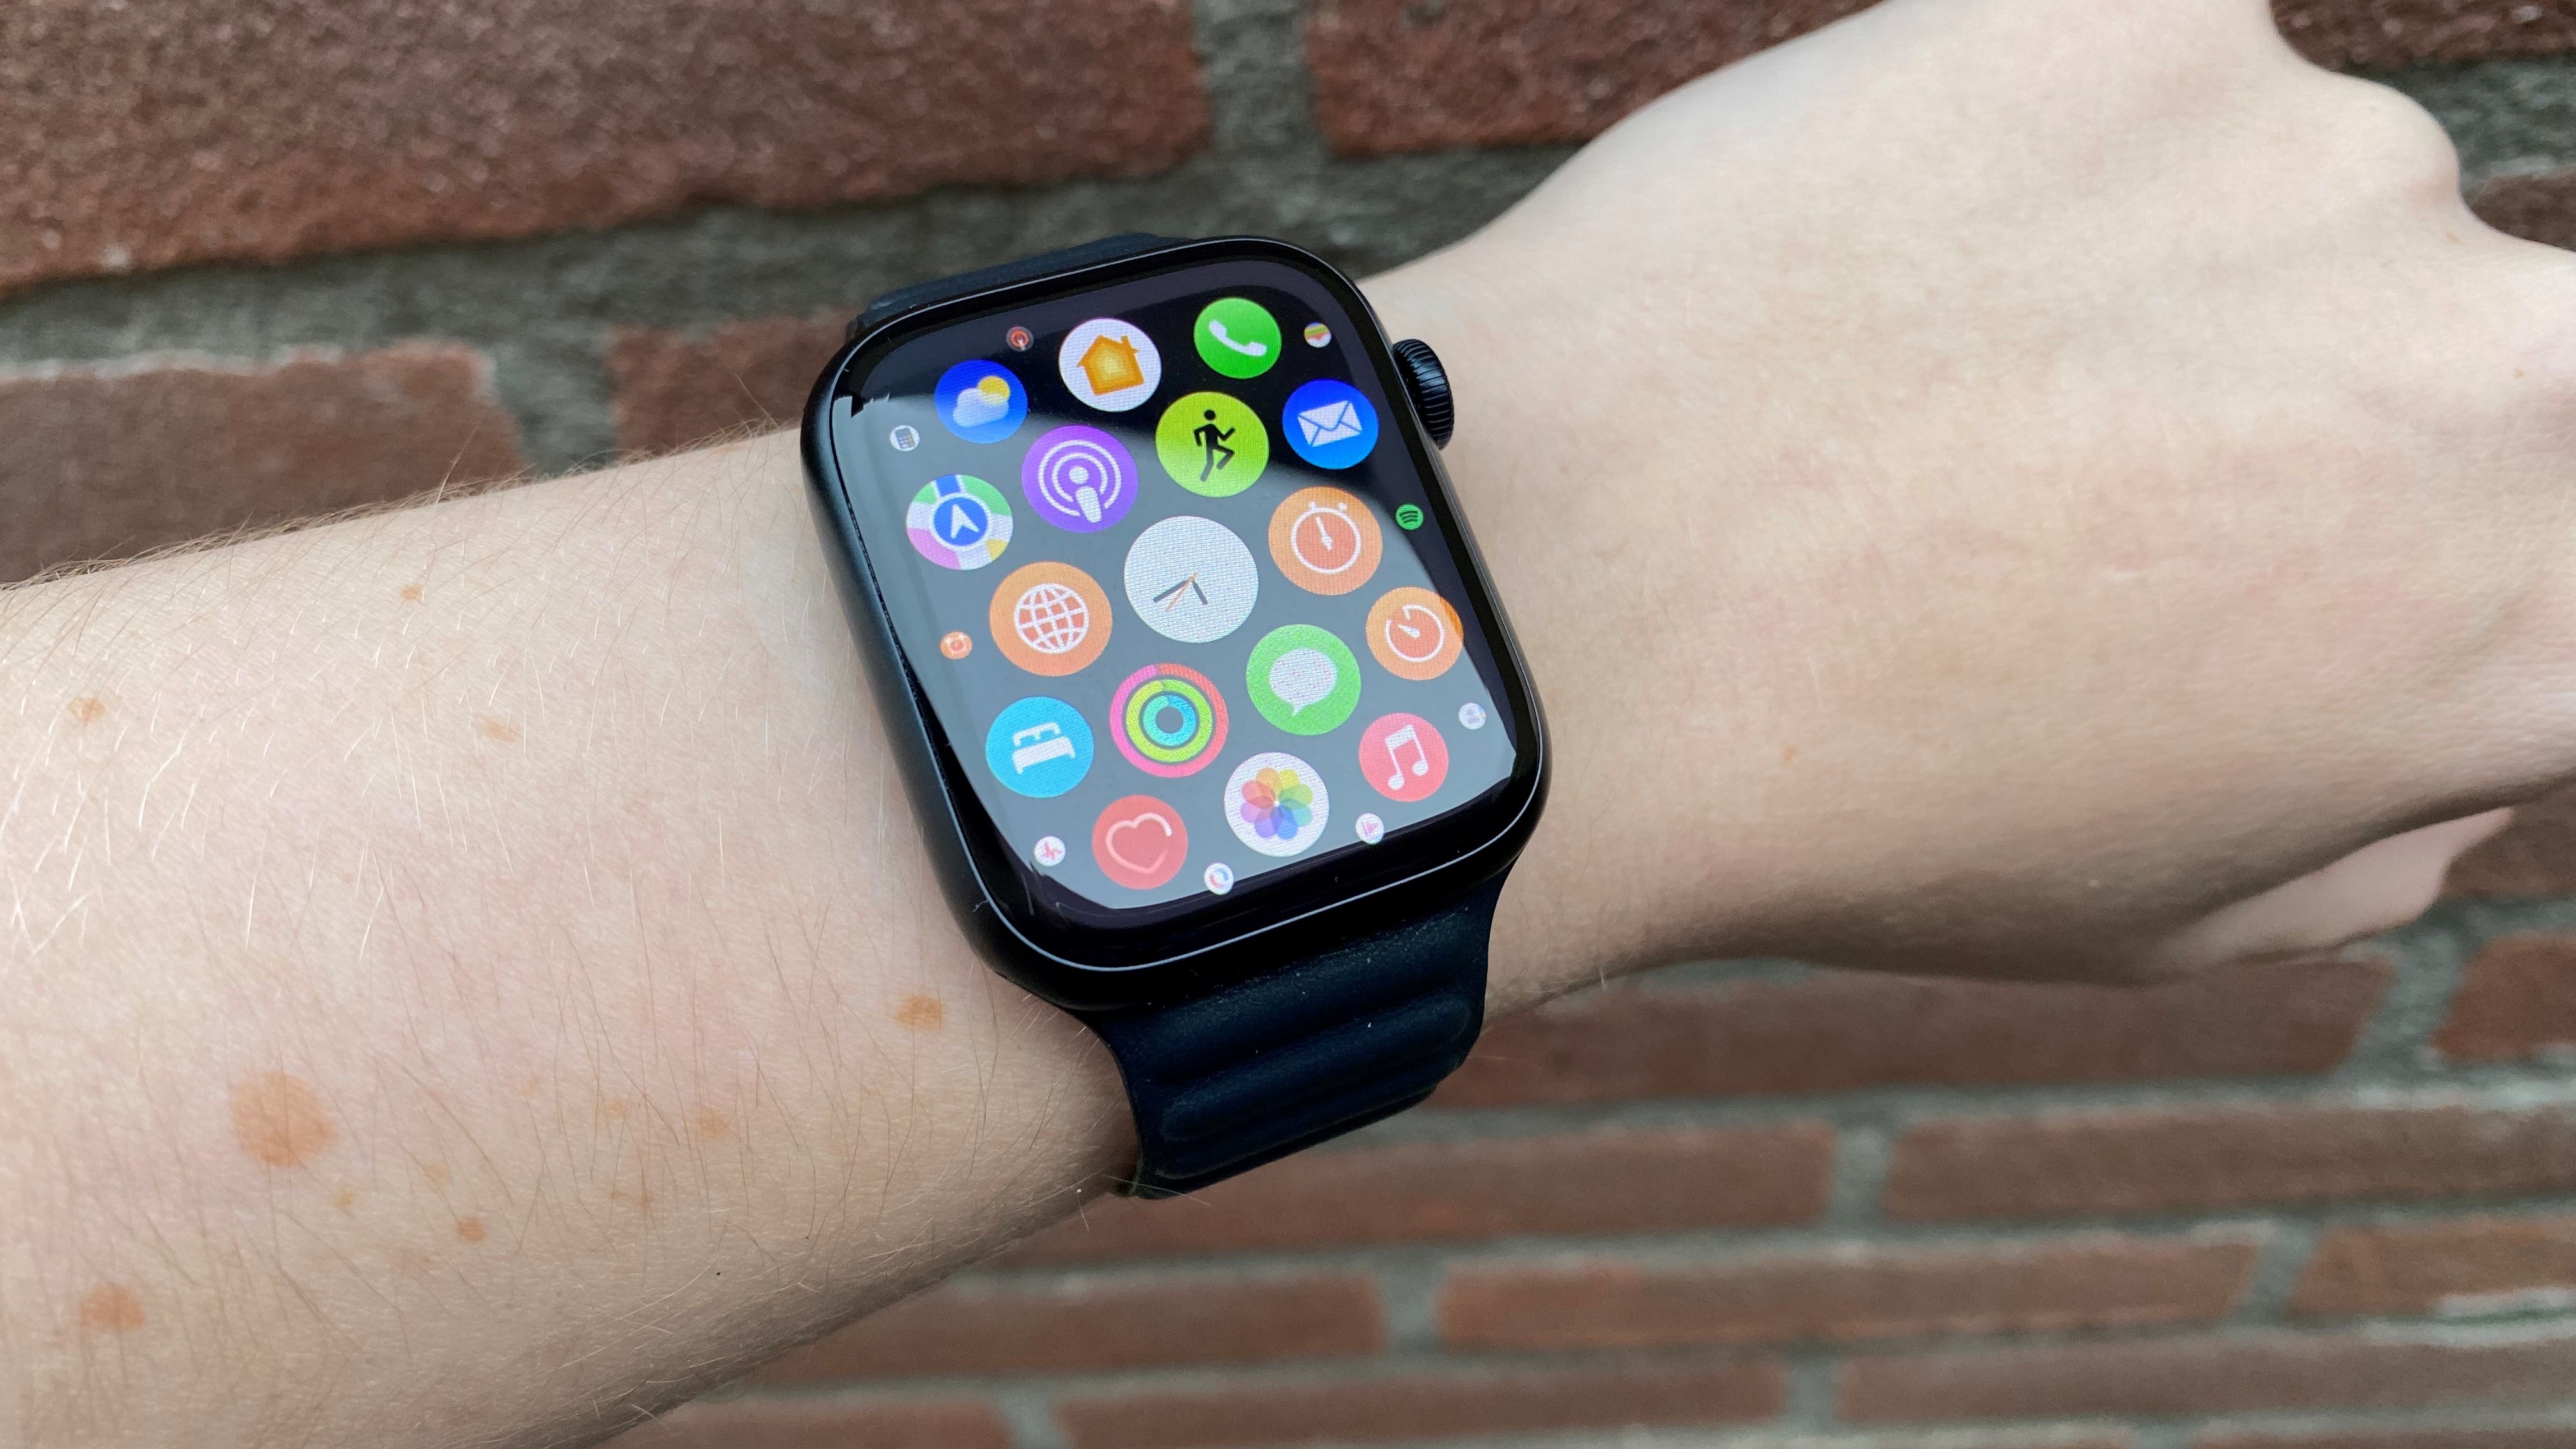 WhatsApp on Apple Watch: how to use the messaging service